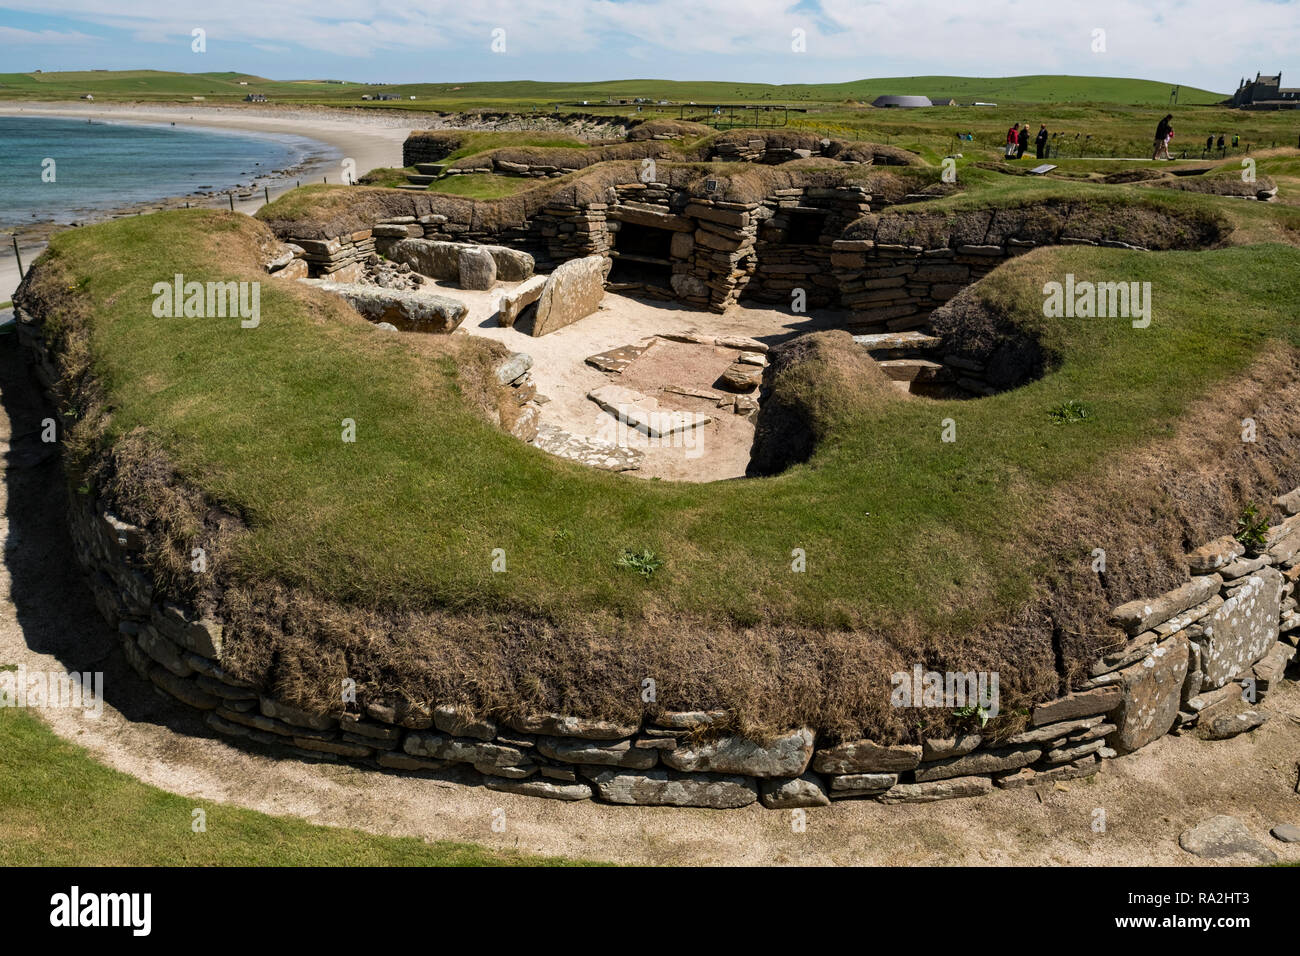 Neolithic settlement of Skara Brae dating from 3180 BC consisting of eight houses, Europe's most complete Neolithic village Stock Photo